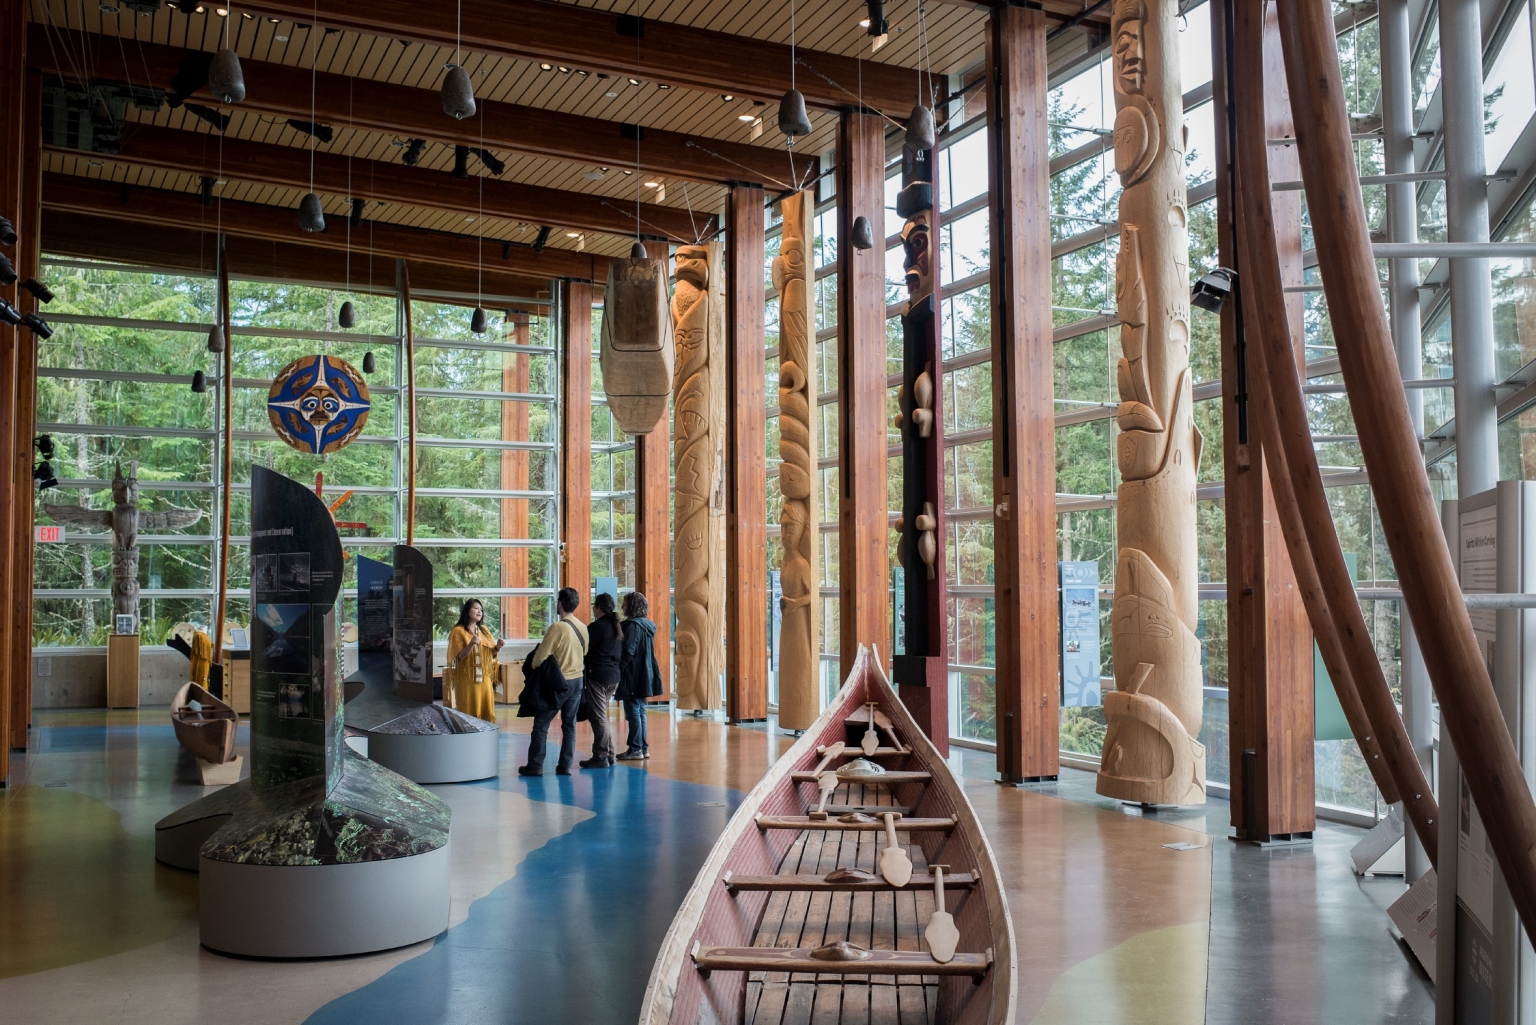 An Indigenous guide speaks to two visitors in an open gallery with cedar beams and tons of natural light. A wooden canoe sits in the foreground to the right, with totem poles and other carvings behind.